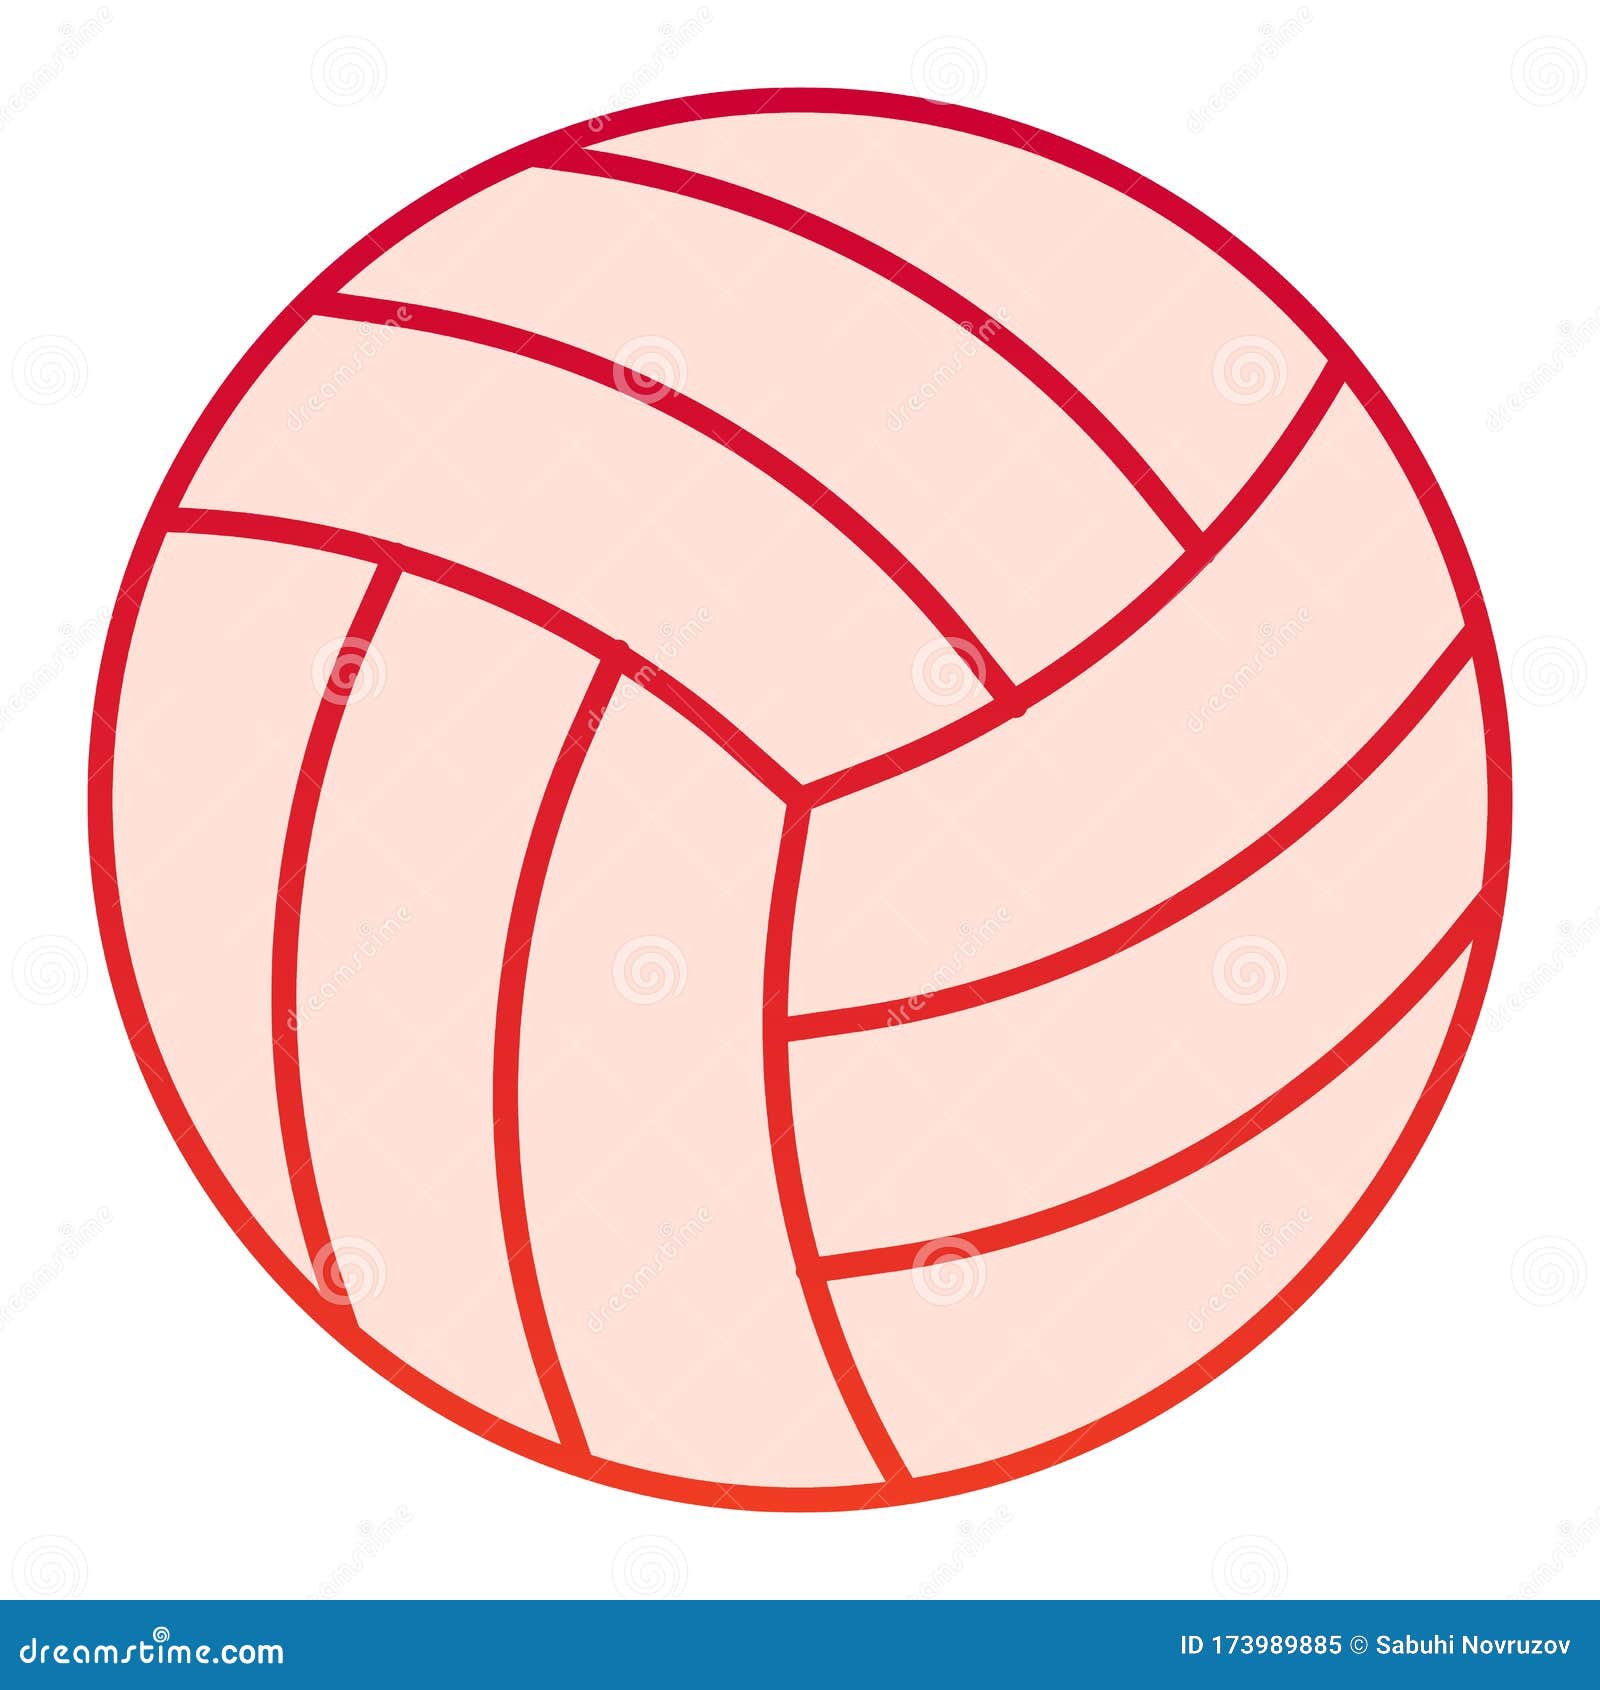 Volleyball Ball Flat Icon. Sport Equipment Vector Illustration Isolated ...